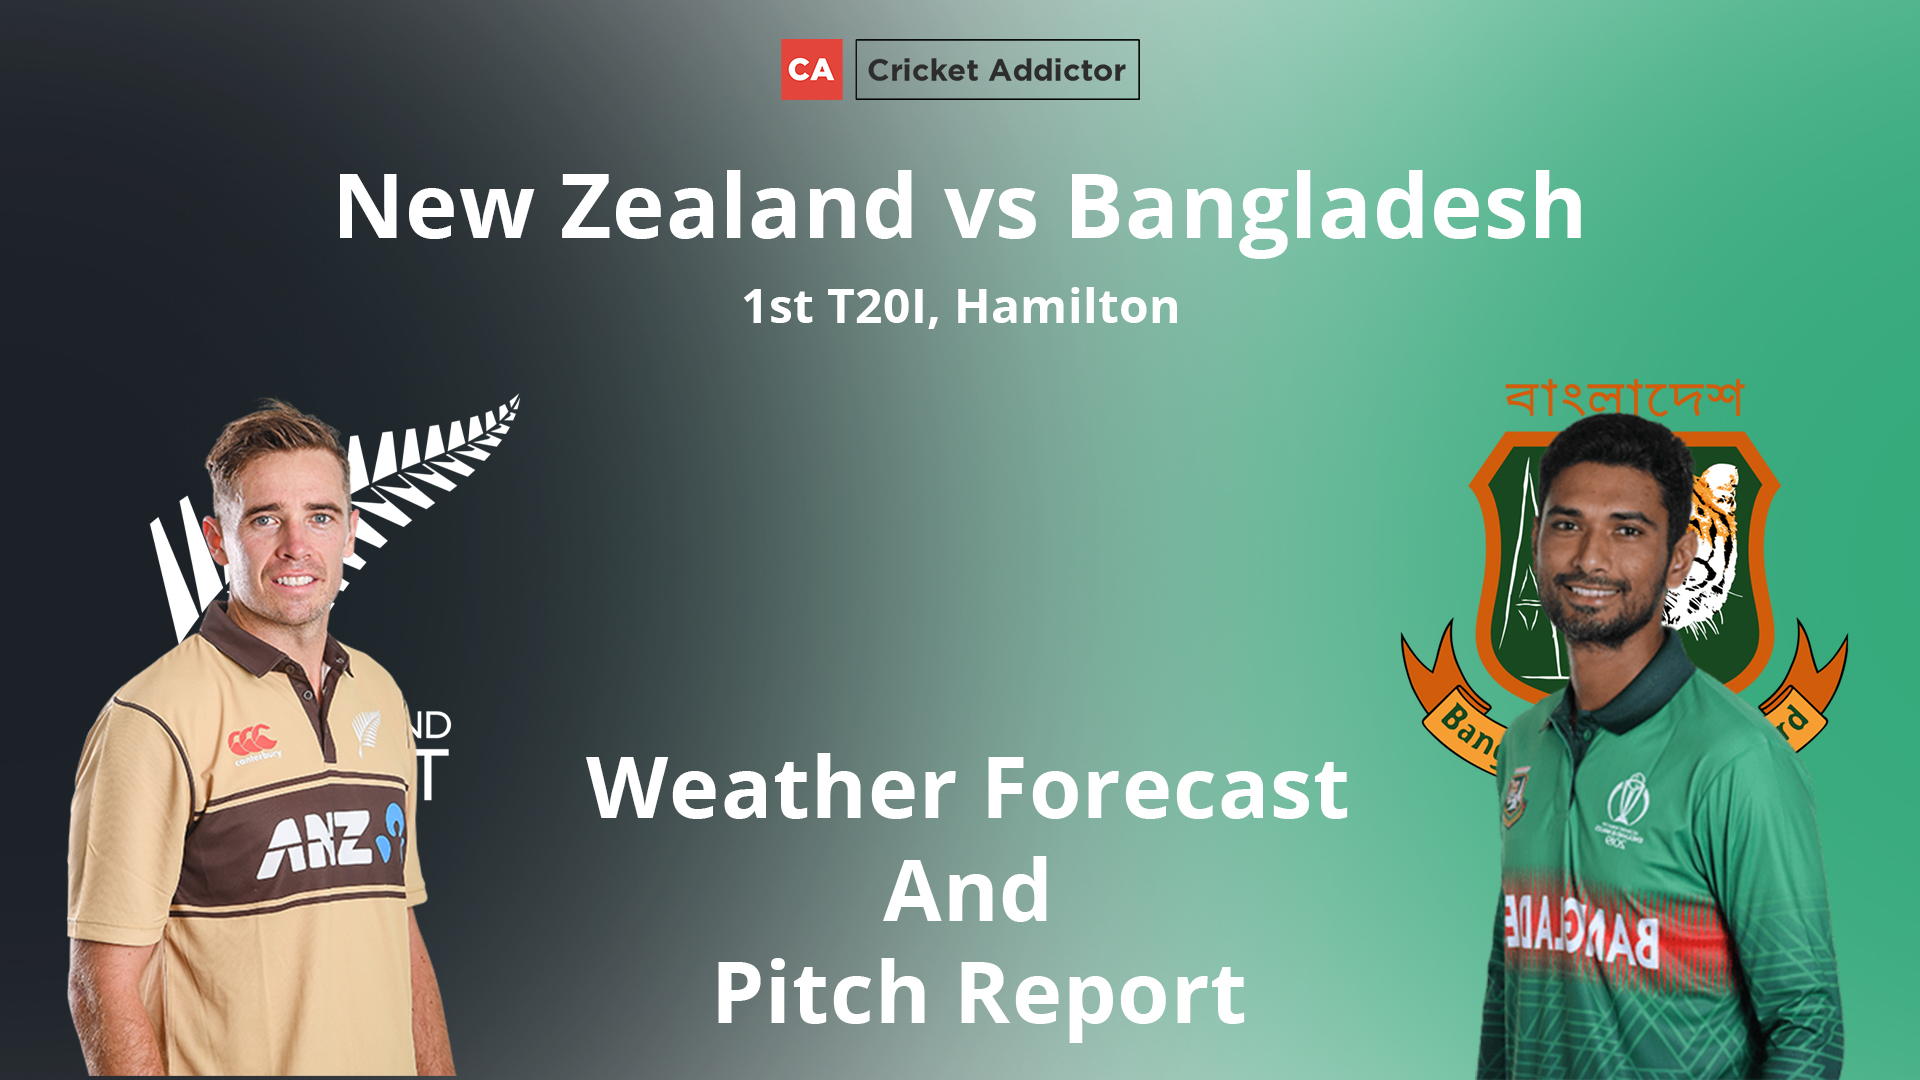 New Zealand vs Bangladesh 2021, 1st T20I: Weather Forecast And Pitch Report